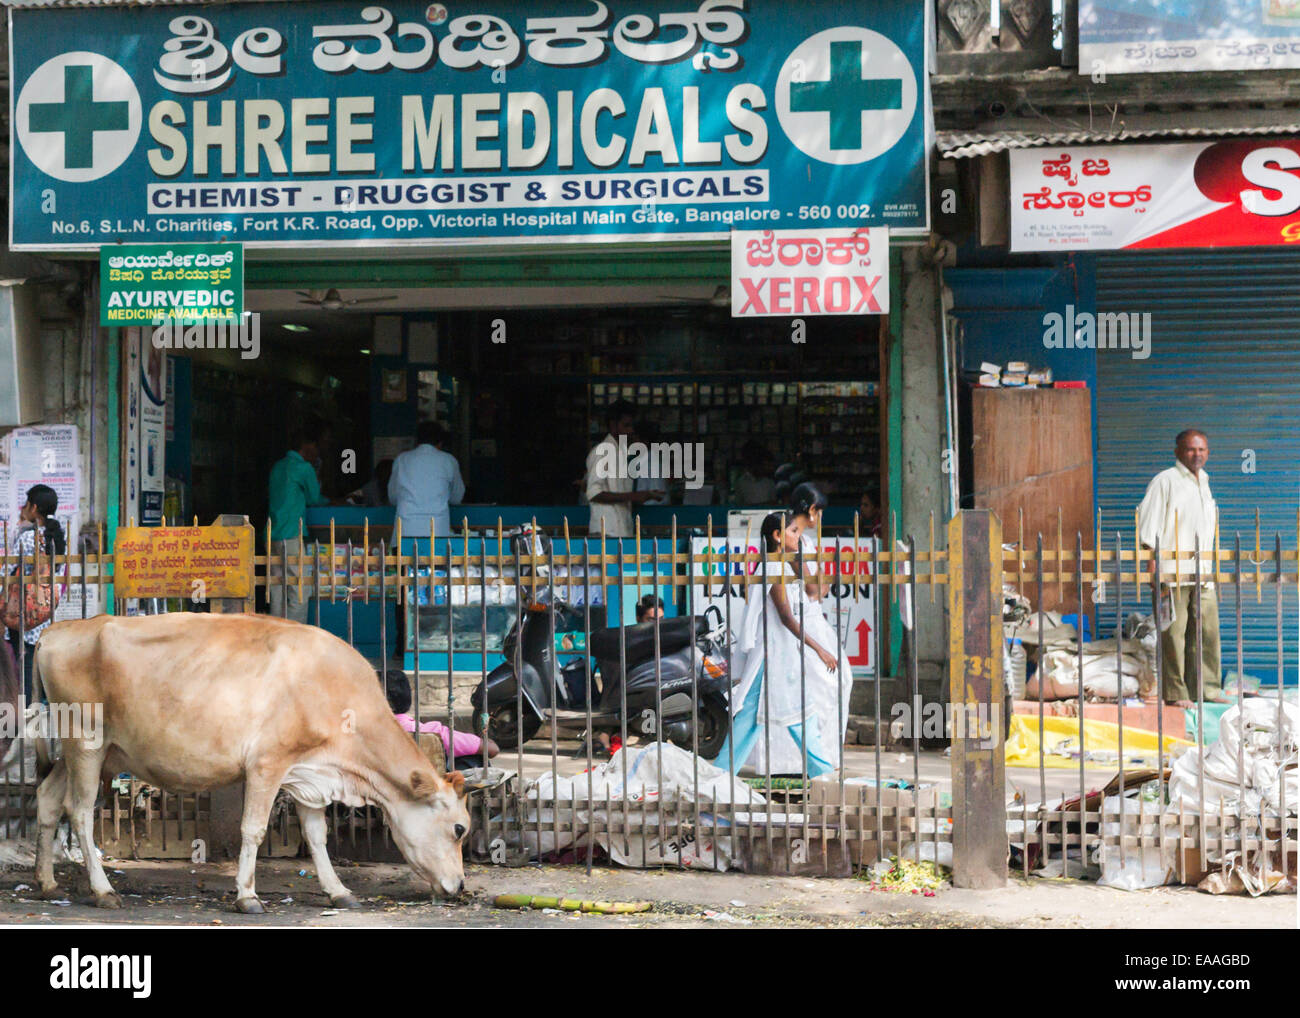 Pharmacy in old town Bangalore. Stock Photo